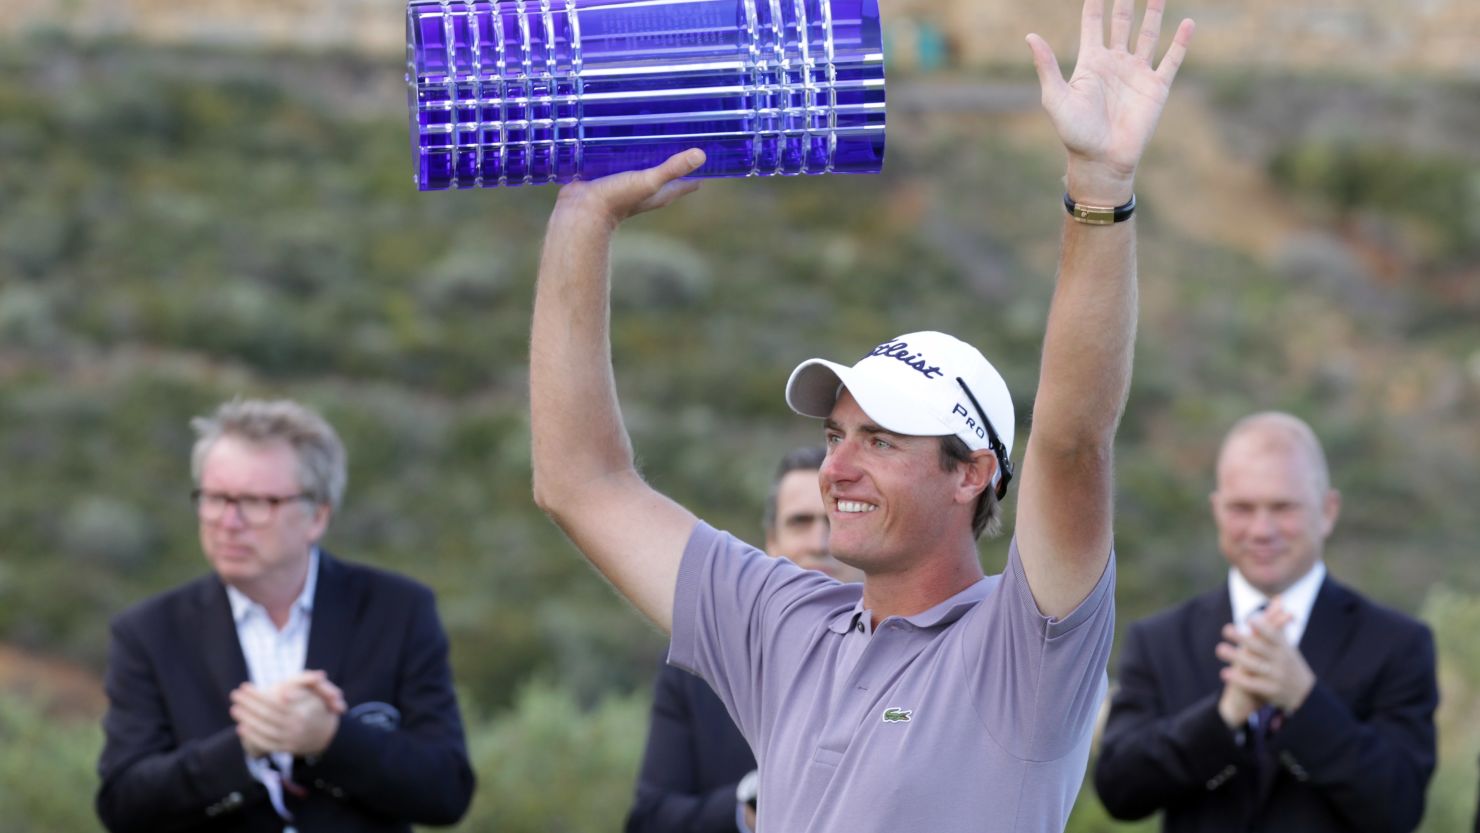 Nicolas Colsaerts won his second European Tour title after winning last year's China Open